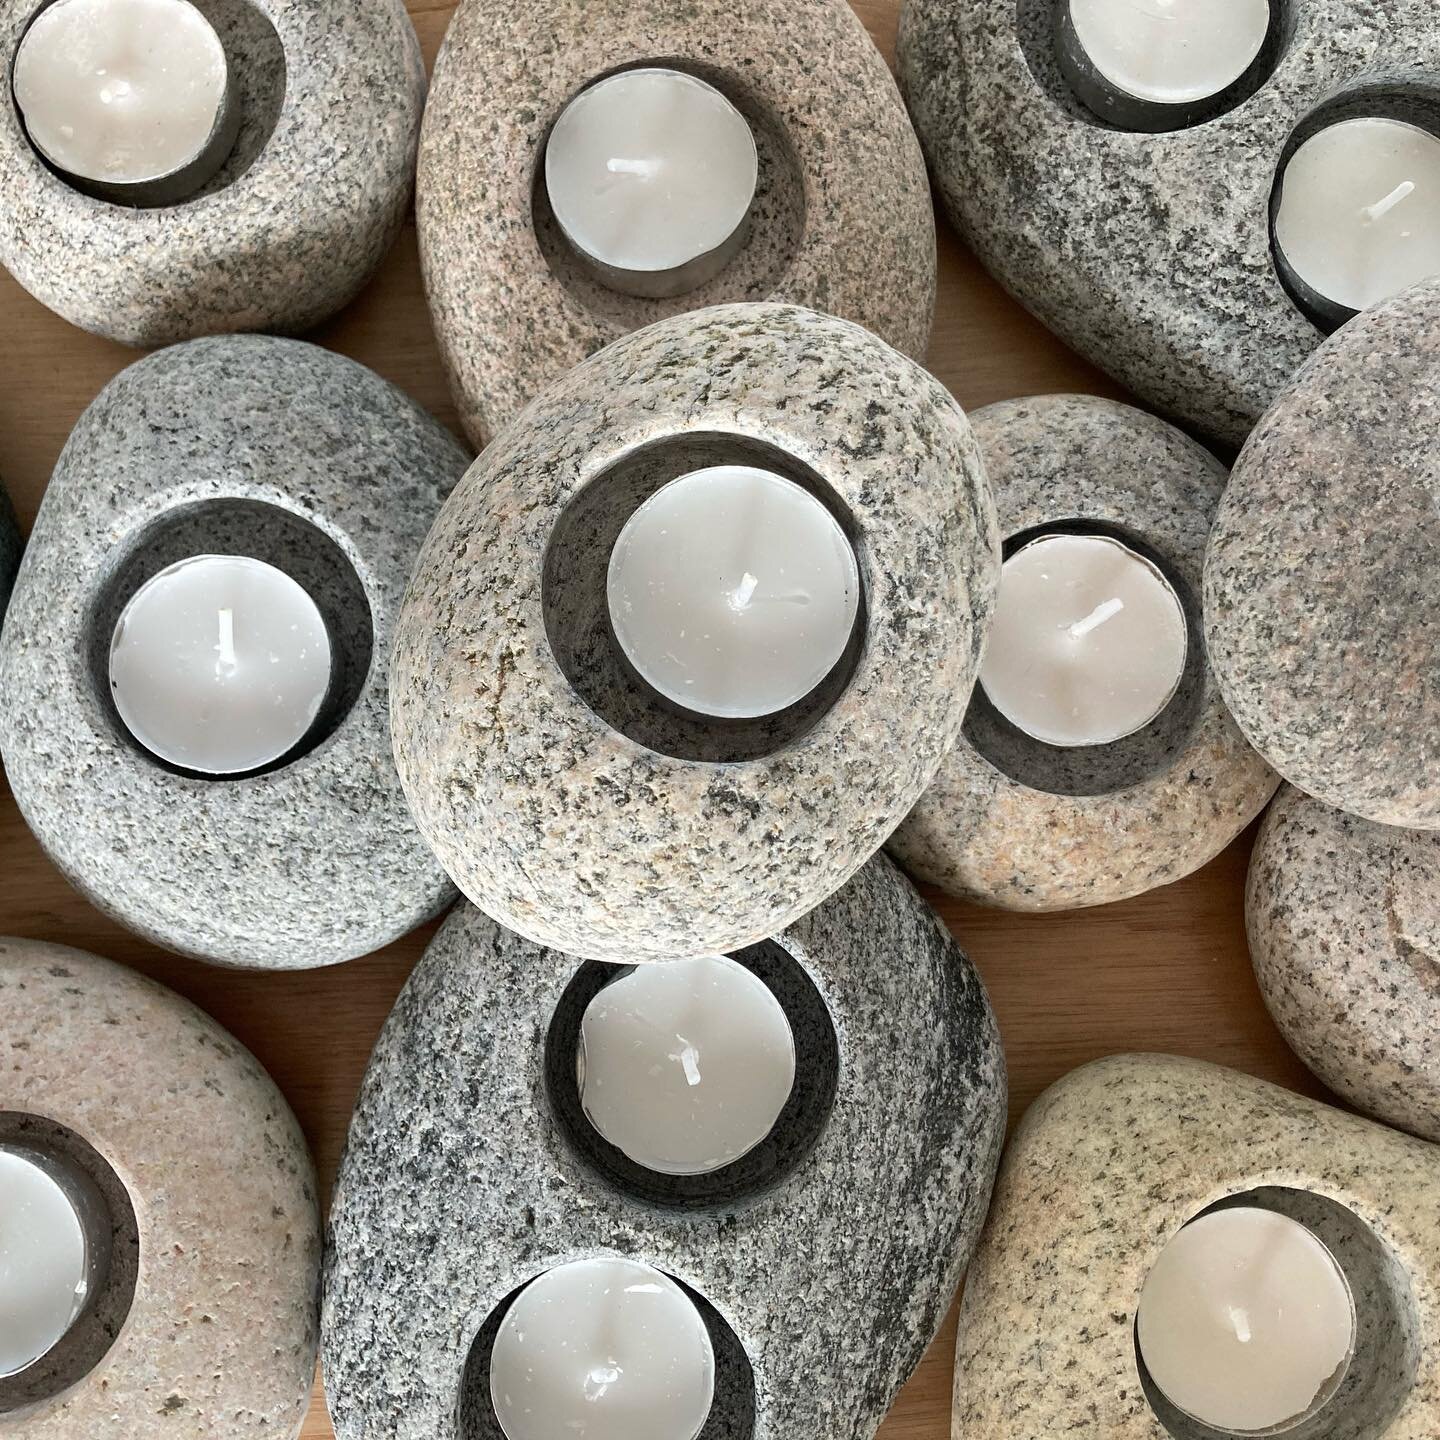 Brand new tea light holders are now available on the website and to pick up in the studio at Seilebost.
We handcarved each of these from Hebridean stone, mostly Lewisian Gneiss which is one of the oldest rocks in the world, and requires care in the c